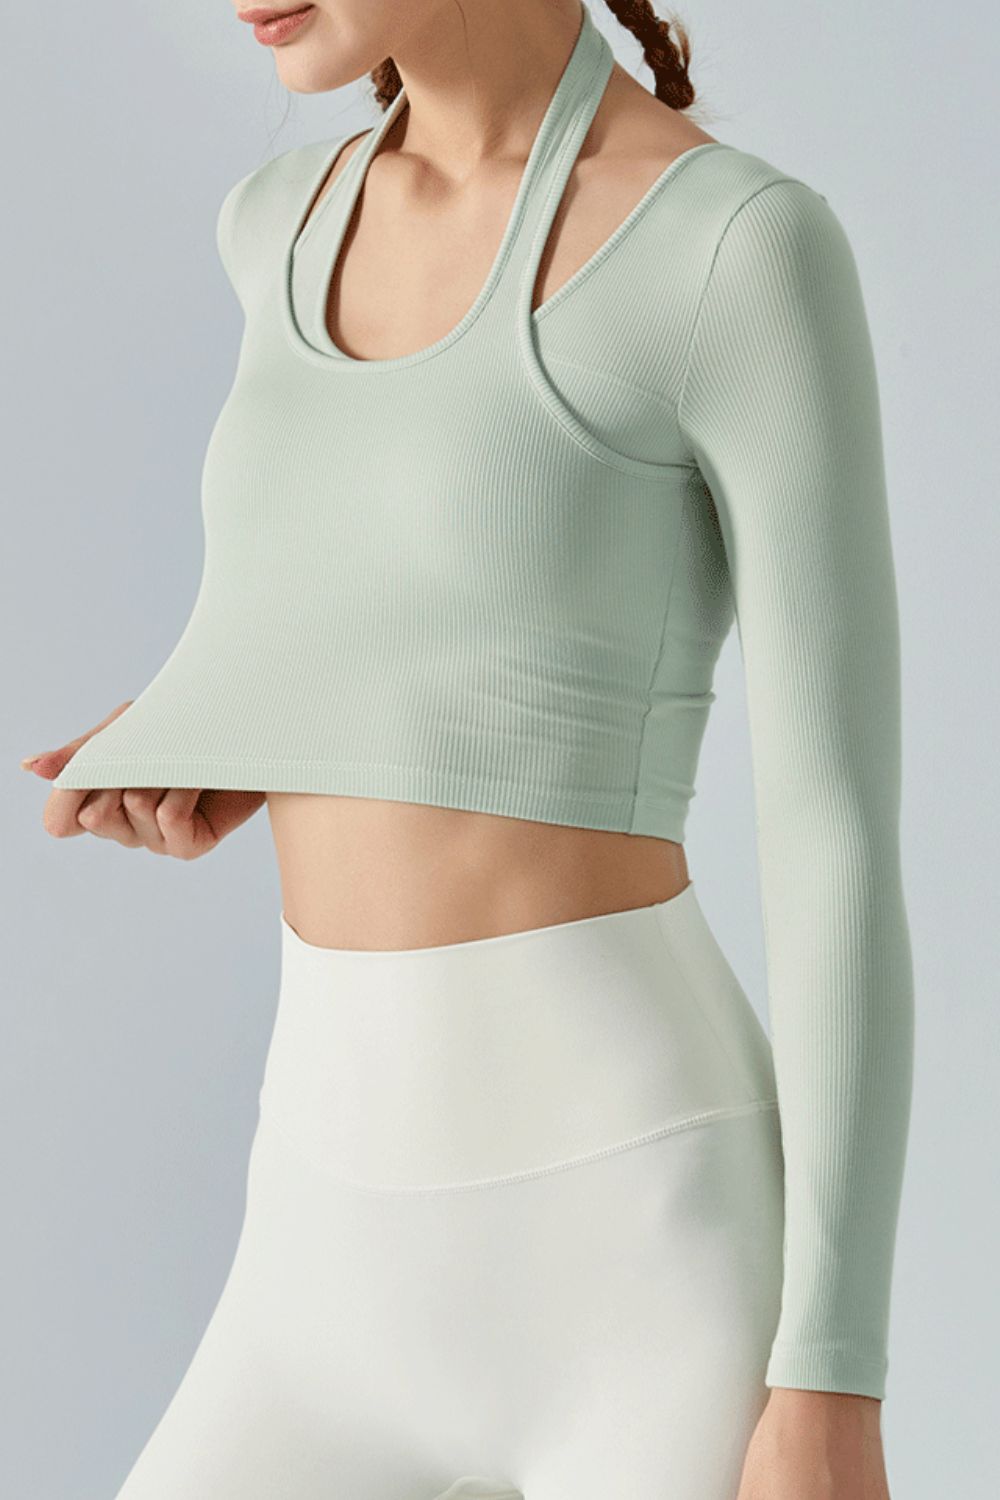 Halter Neck Long Sleeve Cropped Sports Top - Girl Code